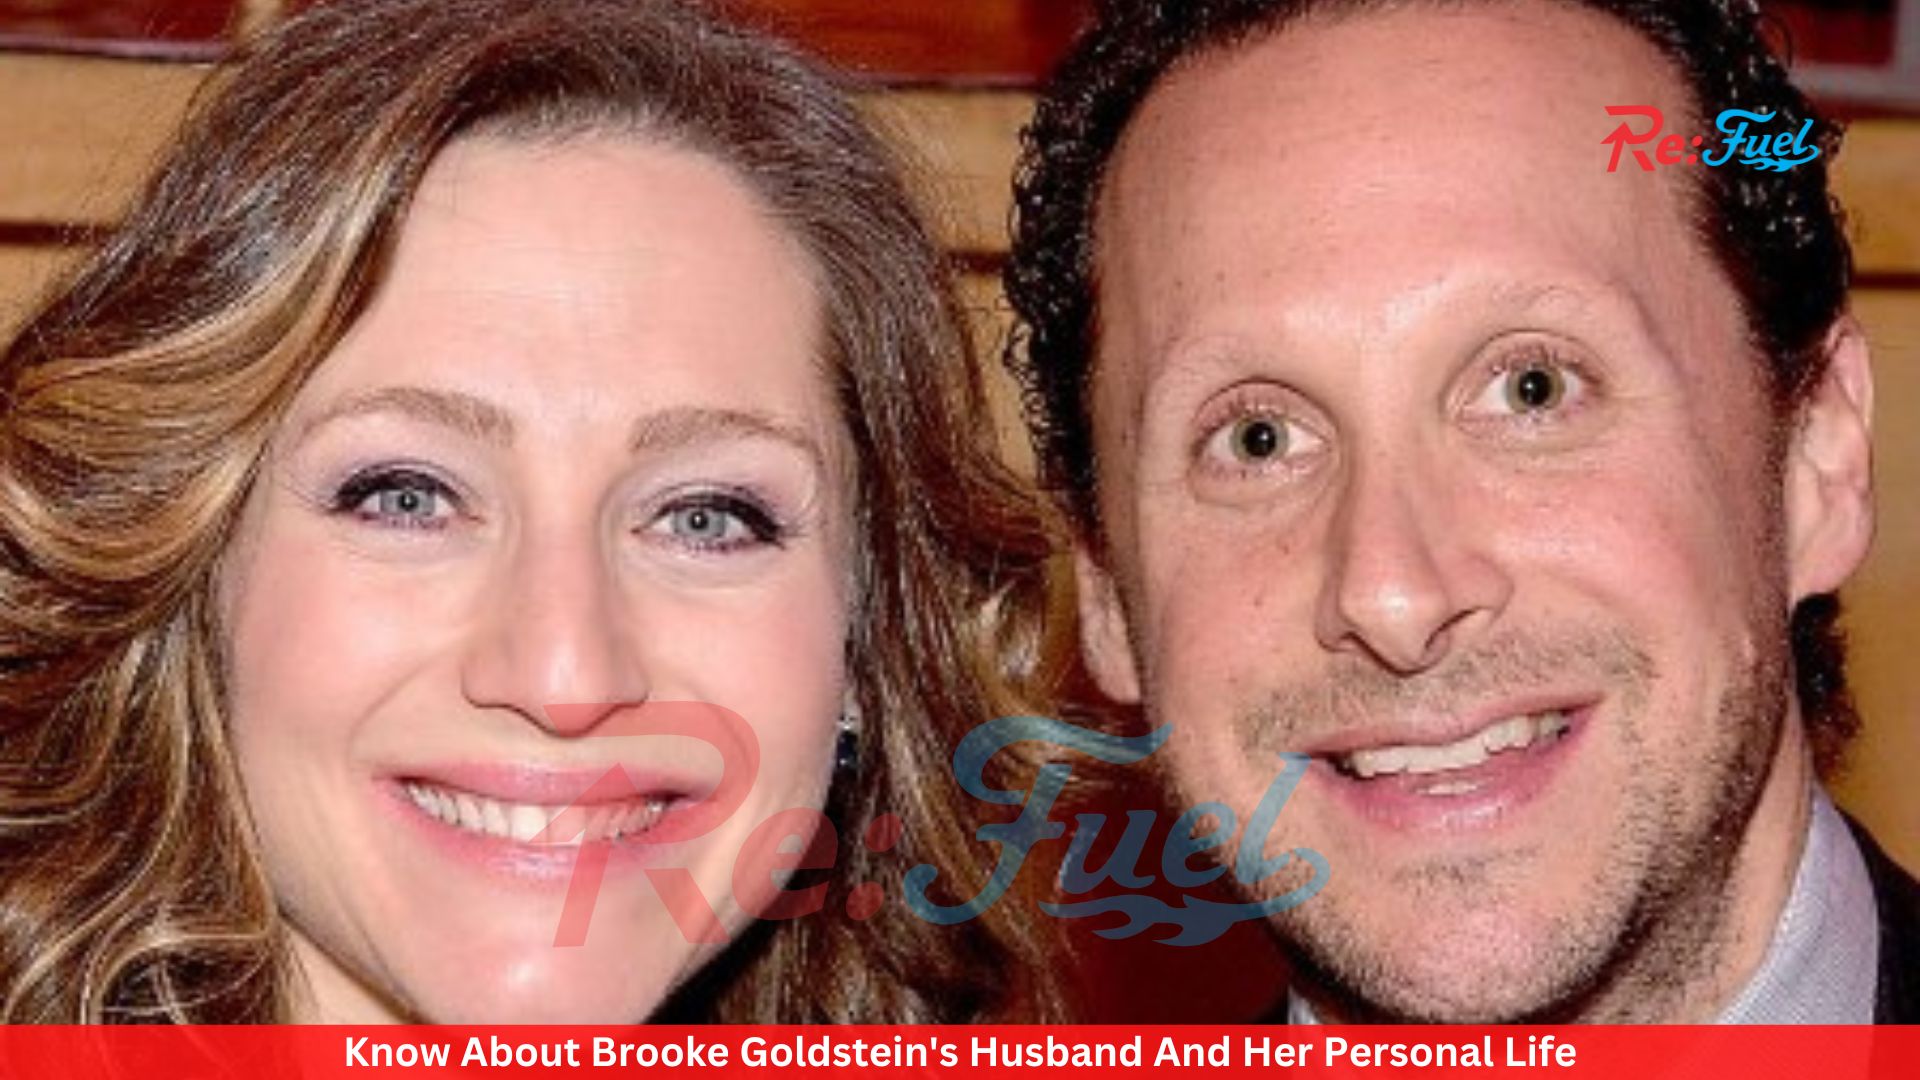 Know About Brooke Goldstein's Husband And Her Personal Life